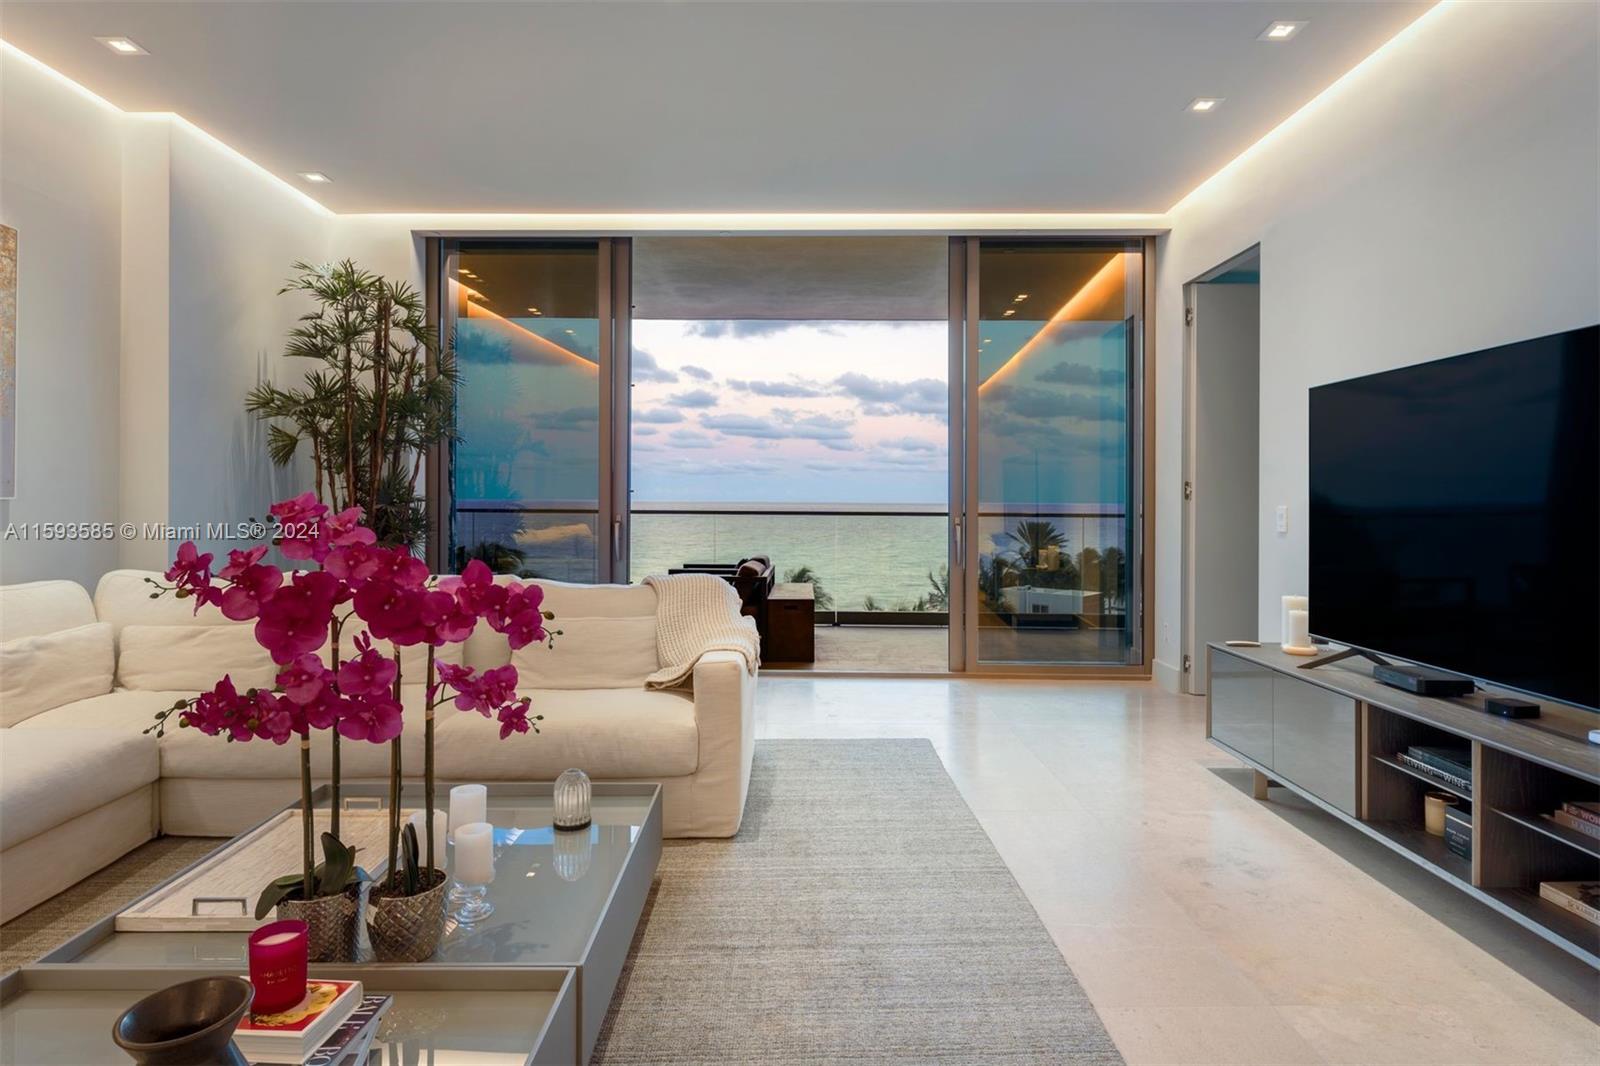 Property for Sale at 18975 Collins Ave 403, Sunny Isles Beach, Miami-Dade County, Florida - Bedrooms: 3 
Bathrooms: 4  - $3,950,000